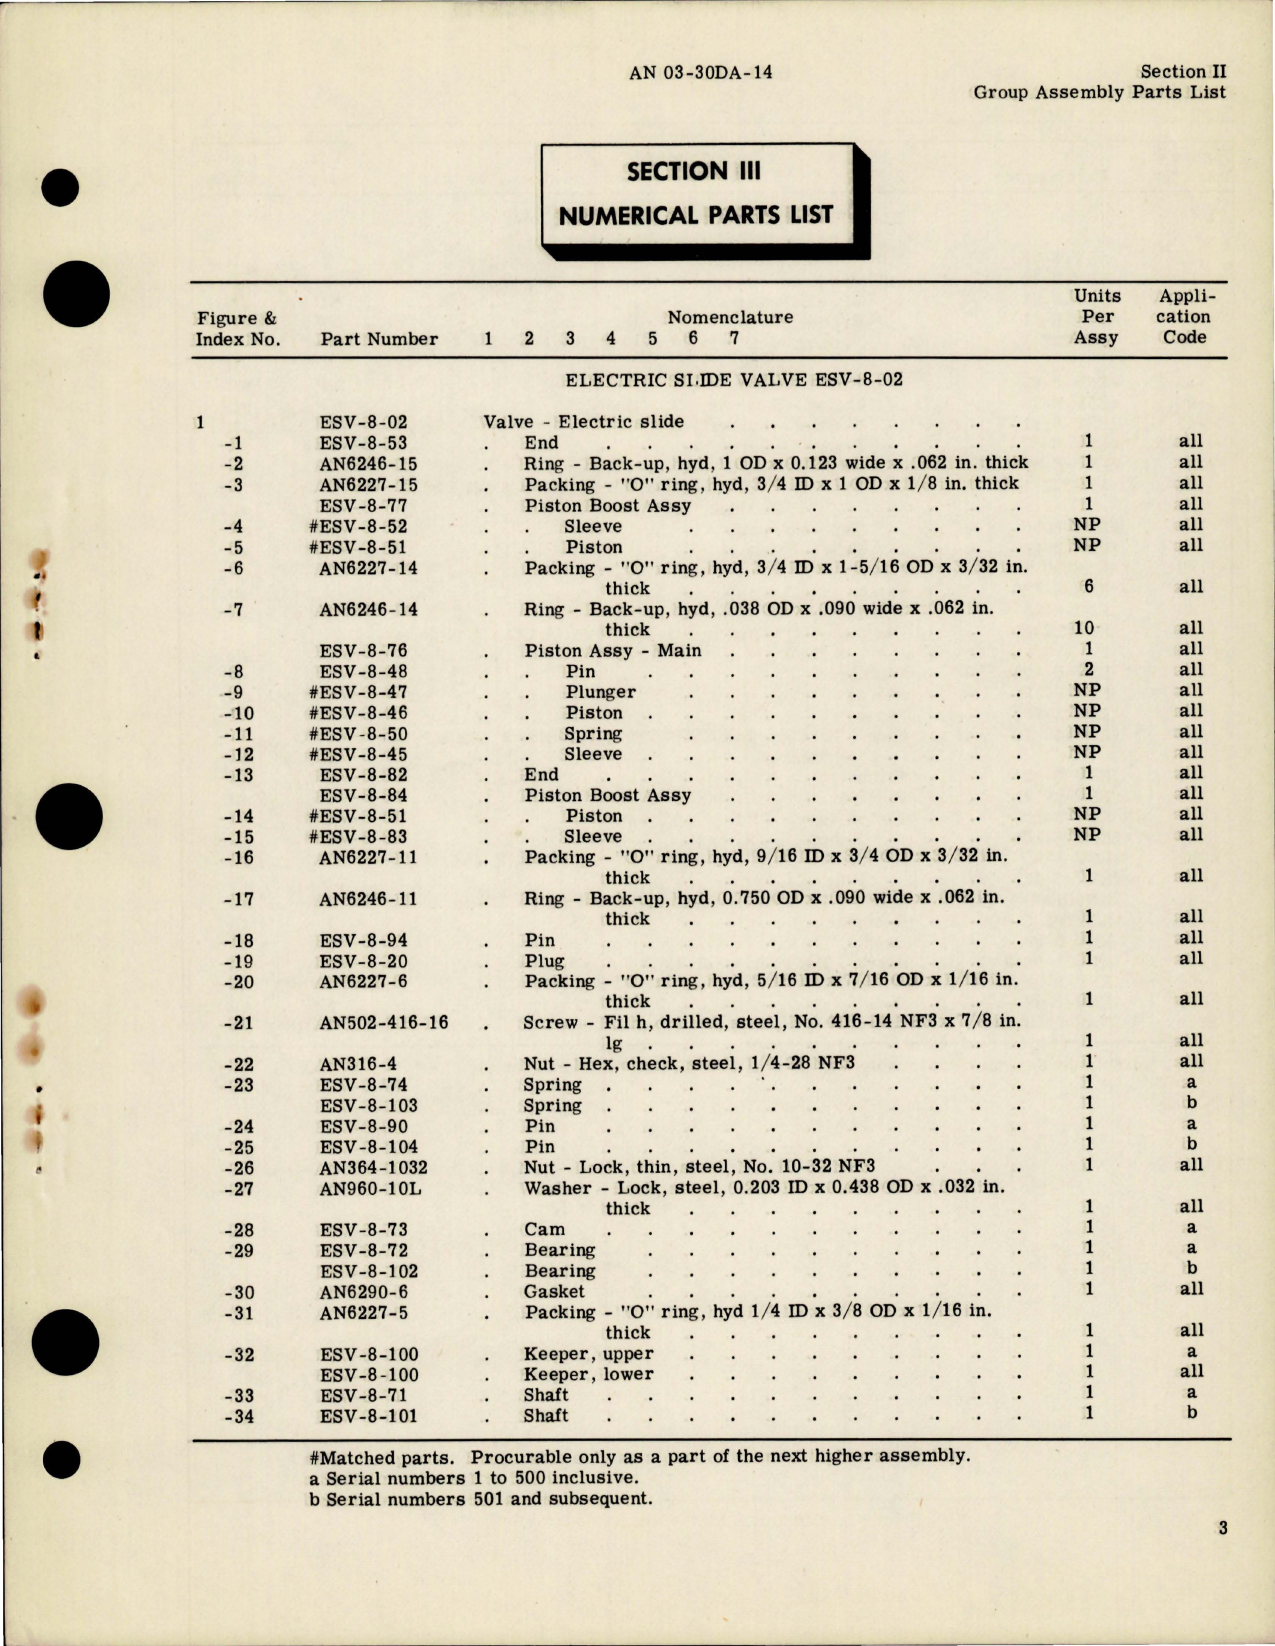 Sample page 5 from AirCorps Library document: Parts Catalog for Electric Slide Valve - Part ESV-8-02